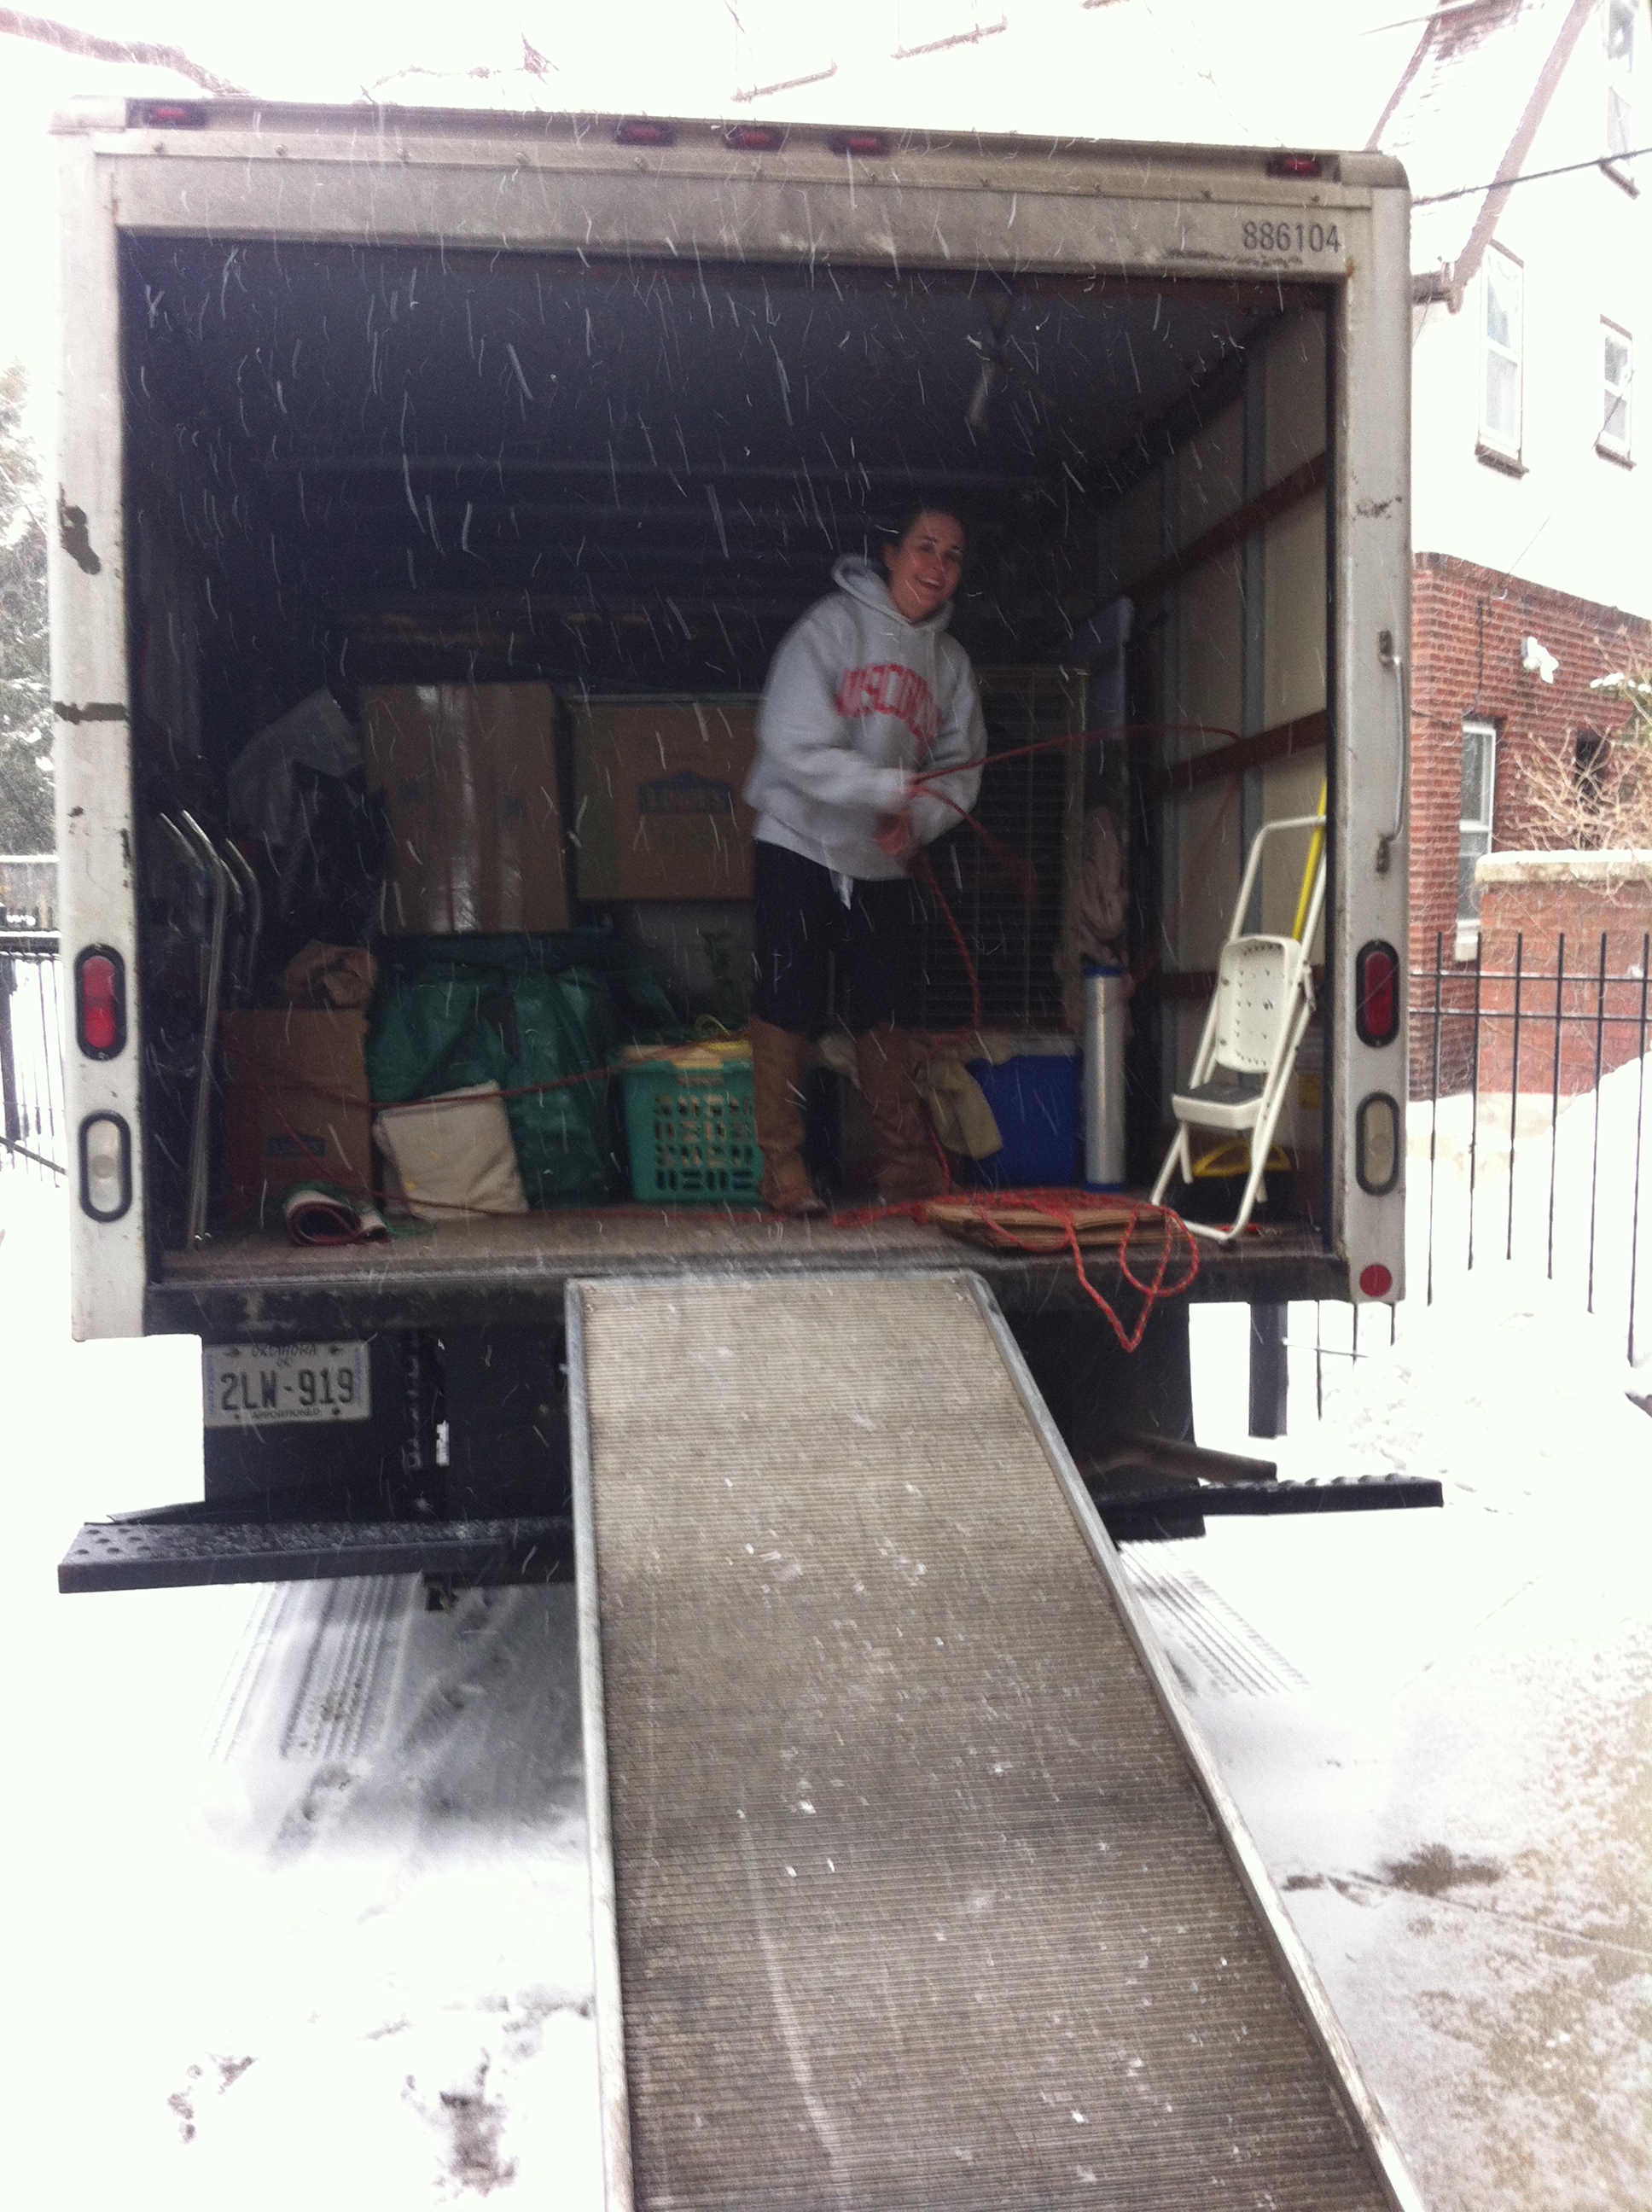 Unloading our truck during a blizzard